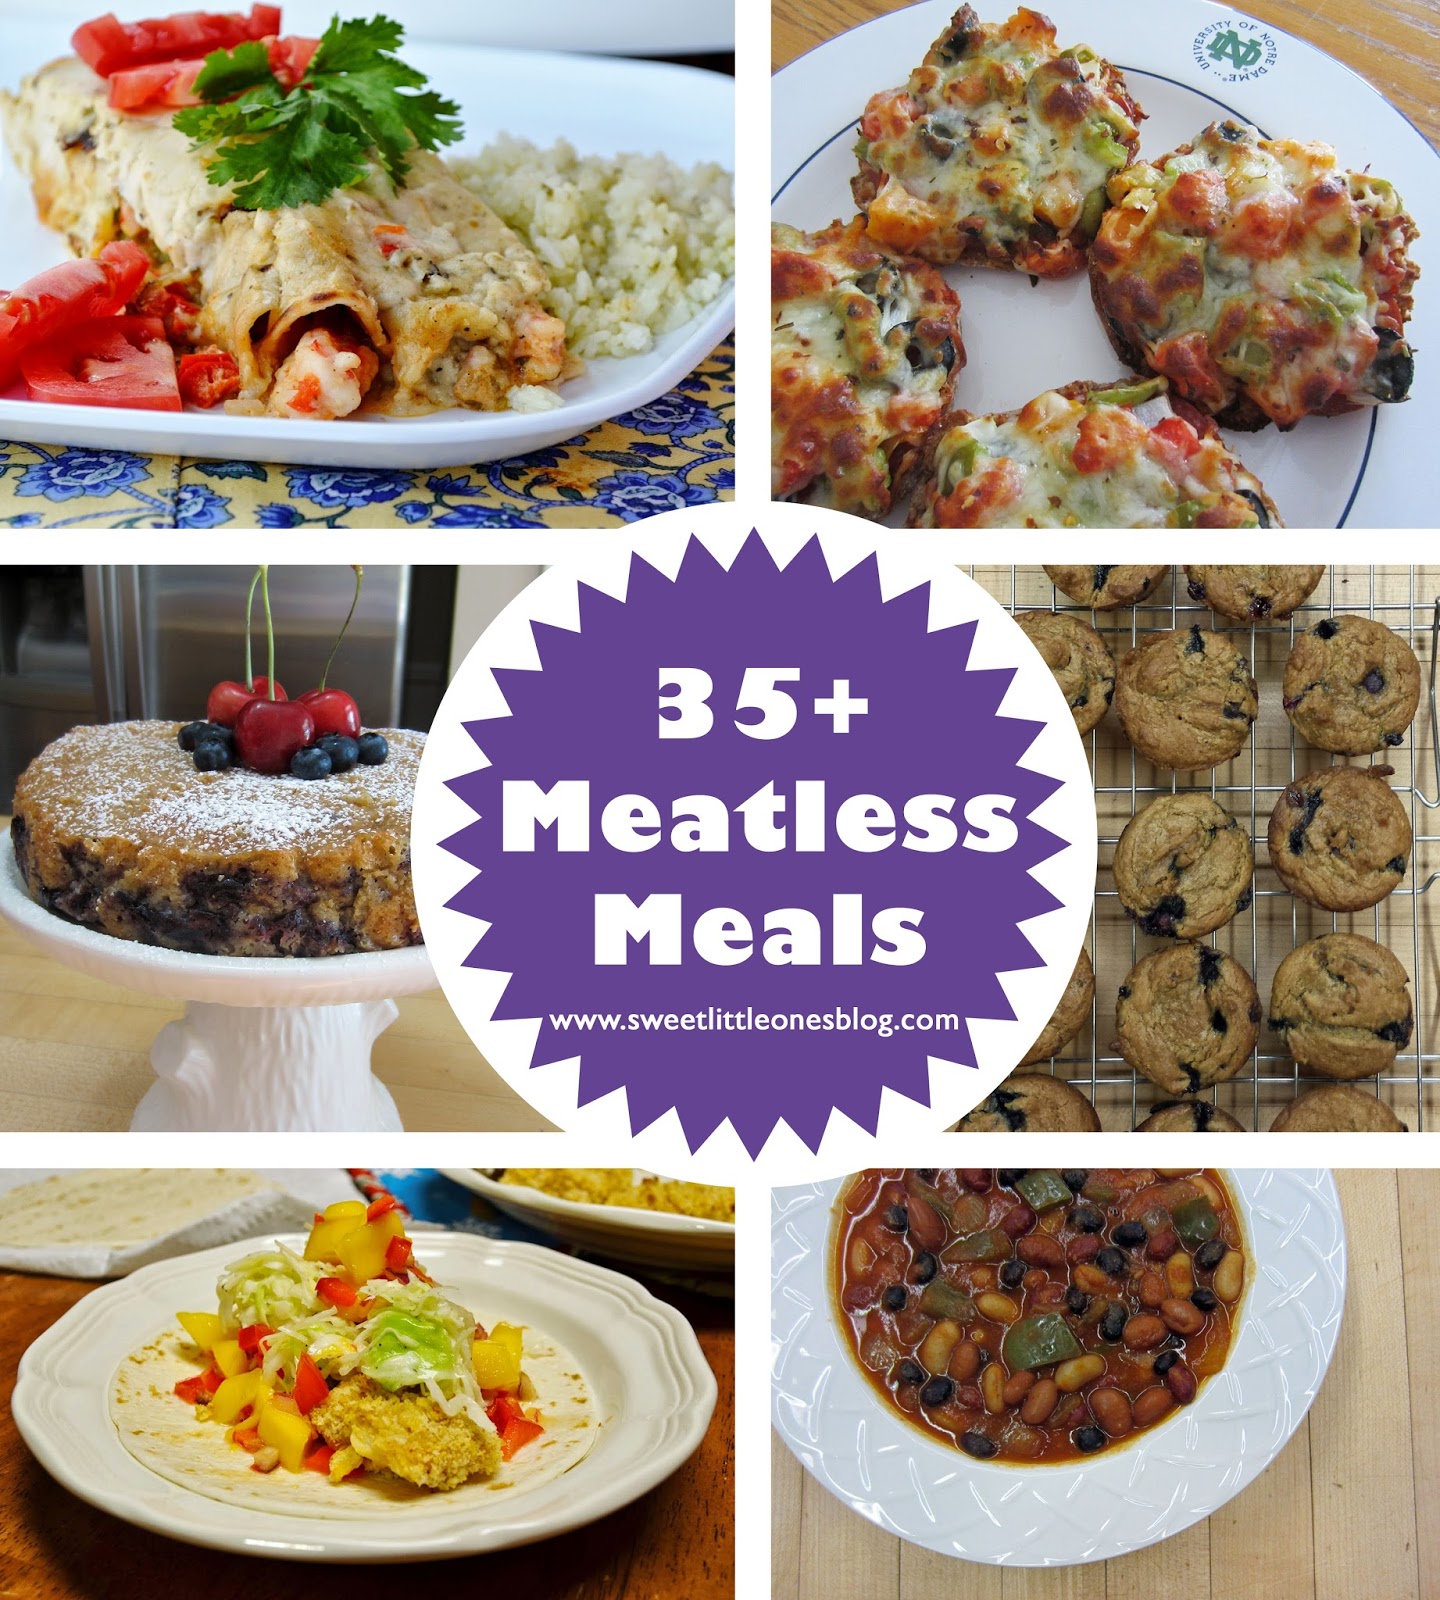 Sweet Little Ones: Meatless Meals Recipes